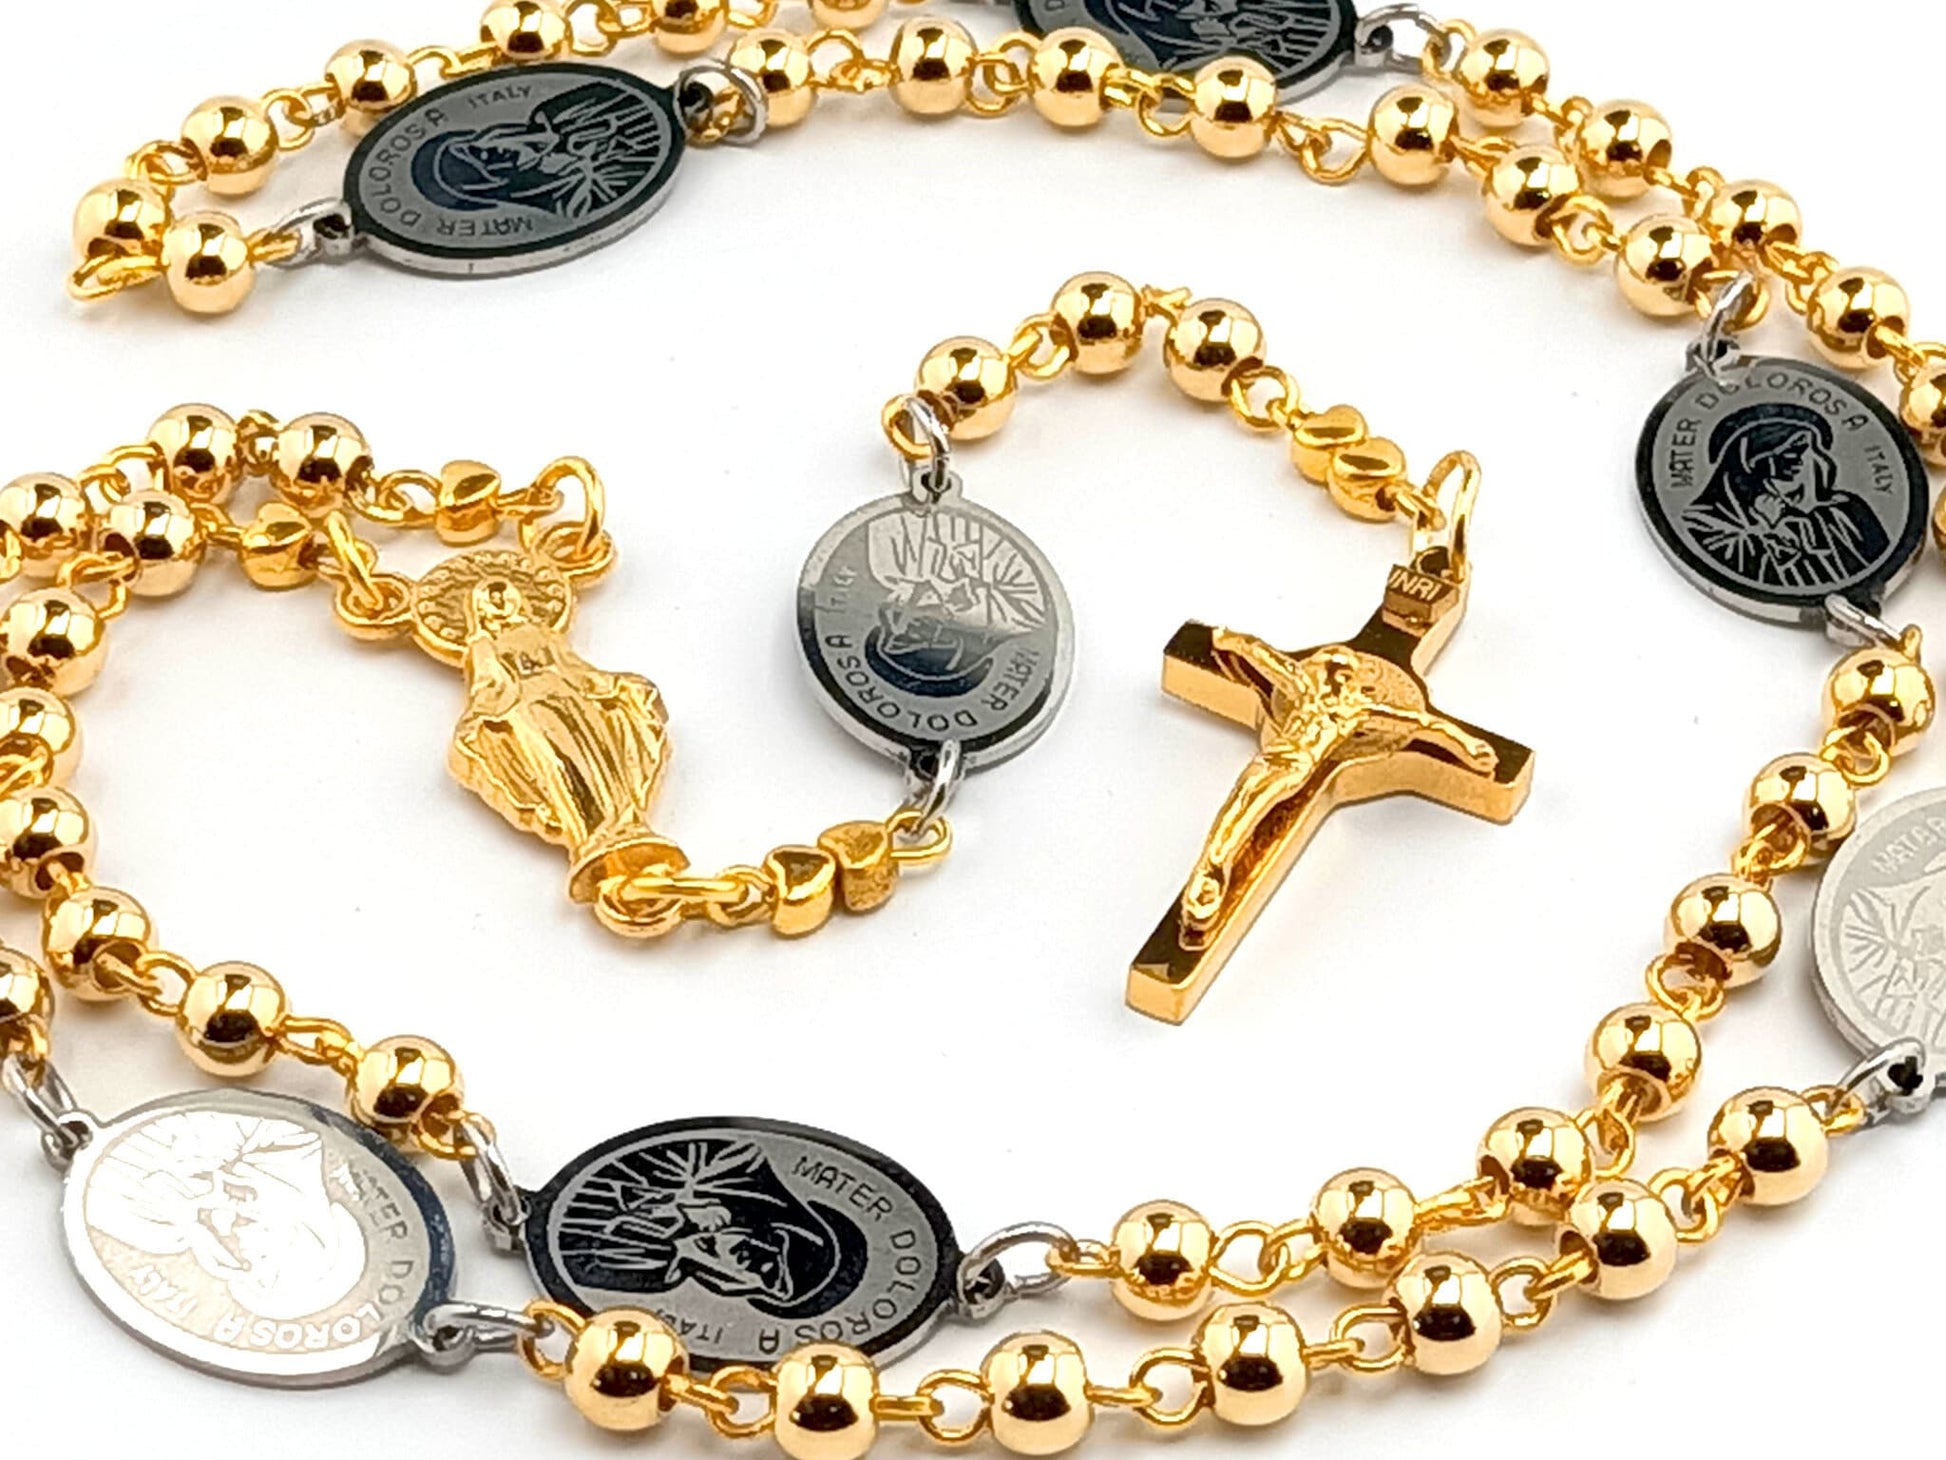 Our Lady of Sorrows unique rosary beads dolor rosary with gold plated stainless steel beads, stainless steel dolor medals and Saint Benedict crucifix.